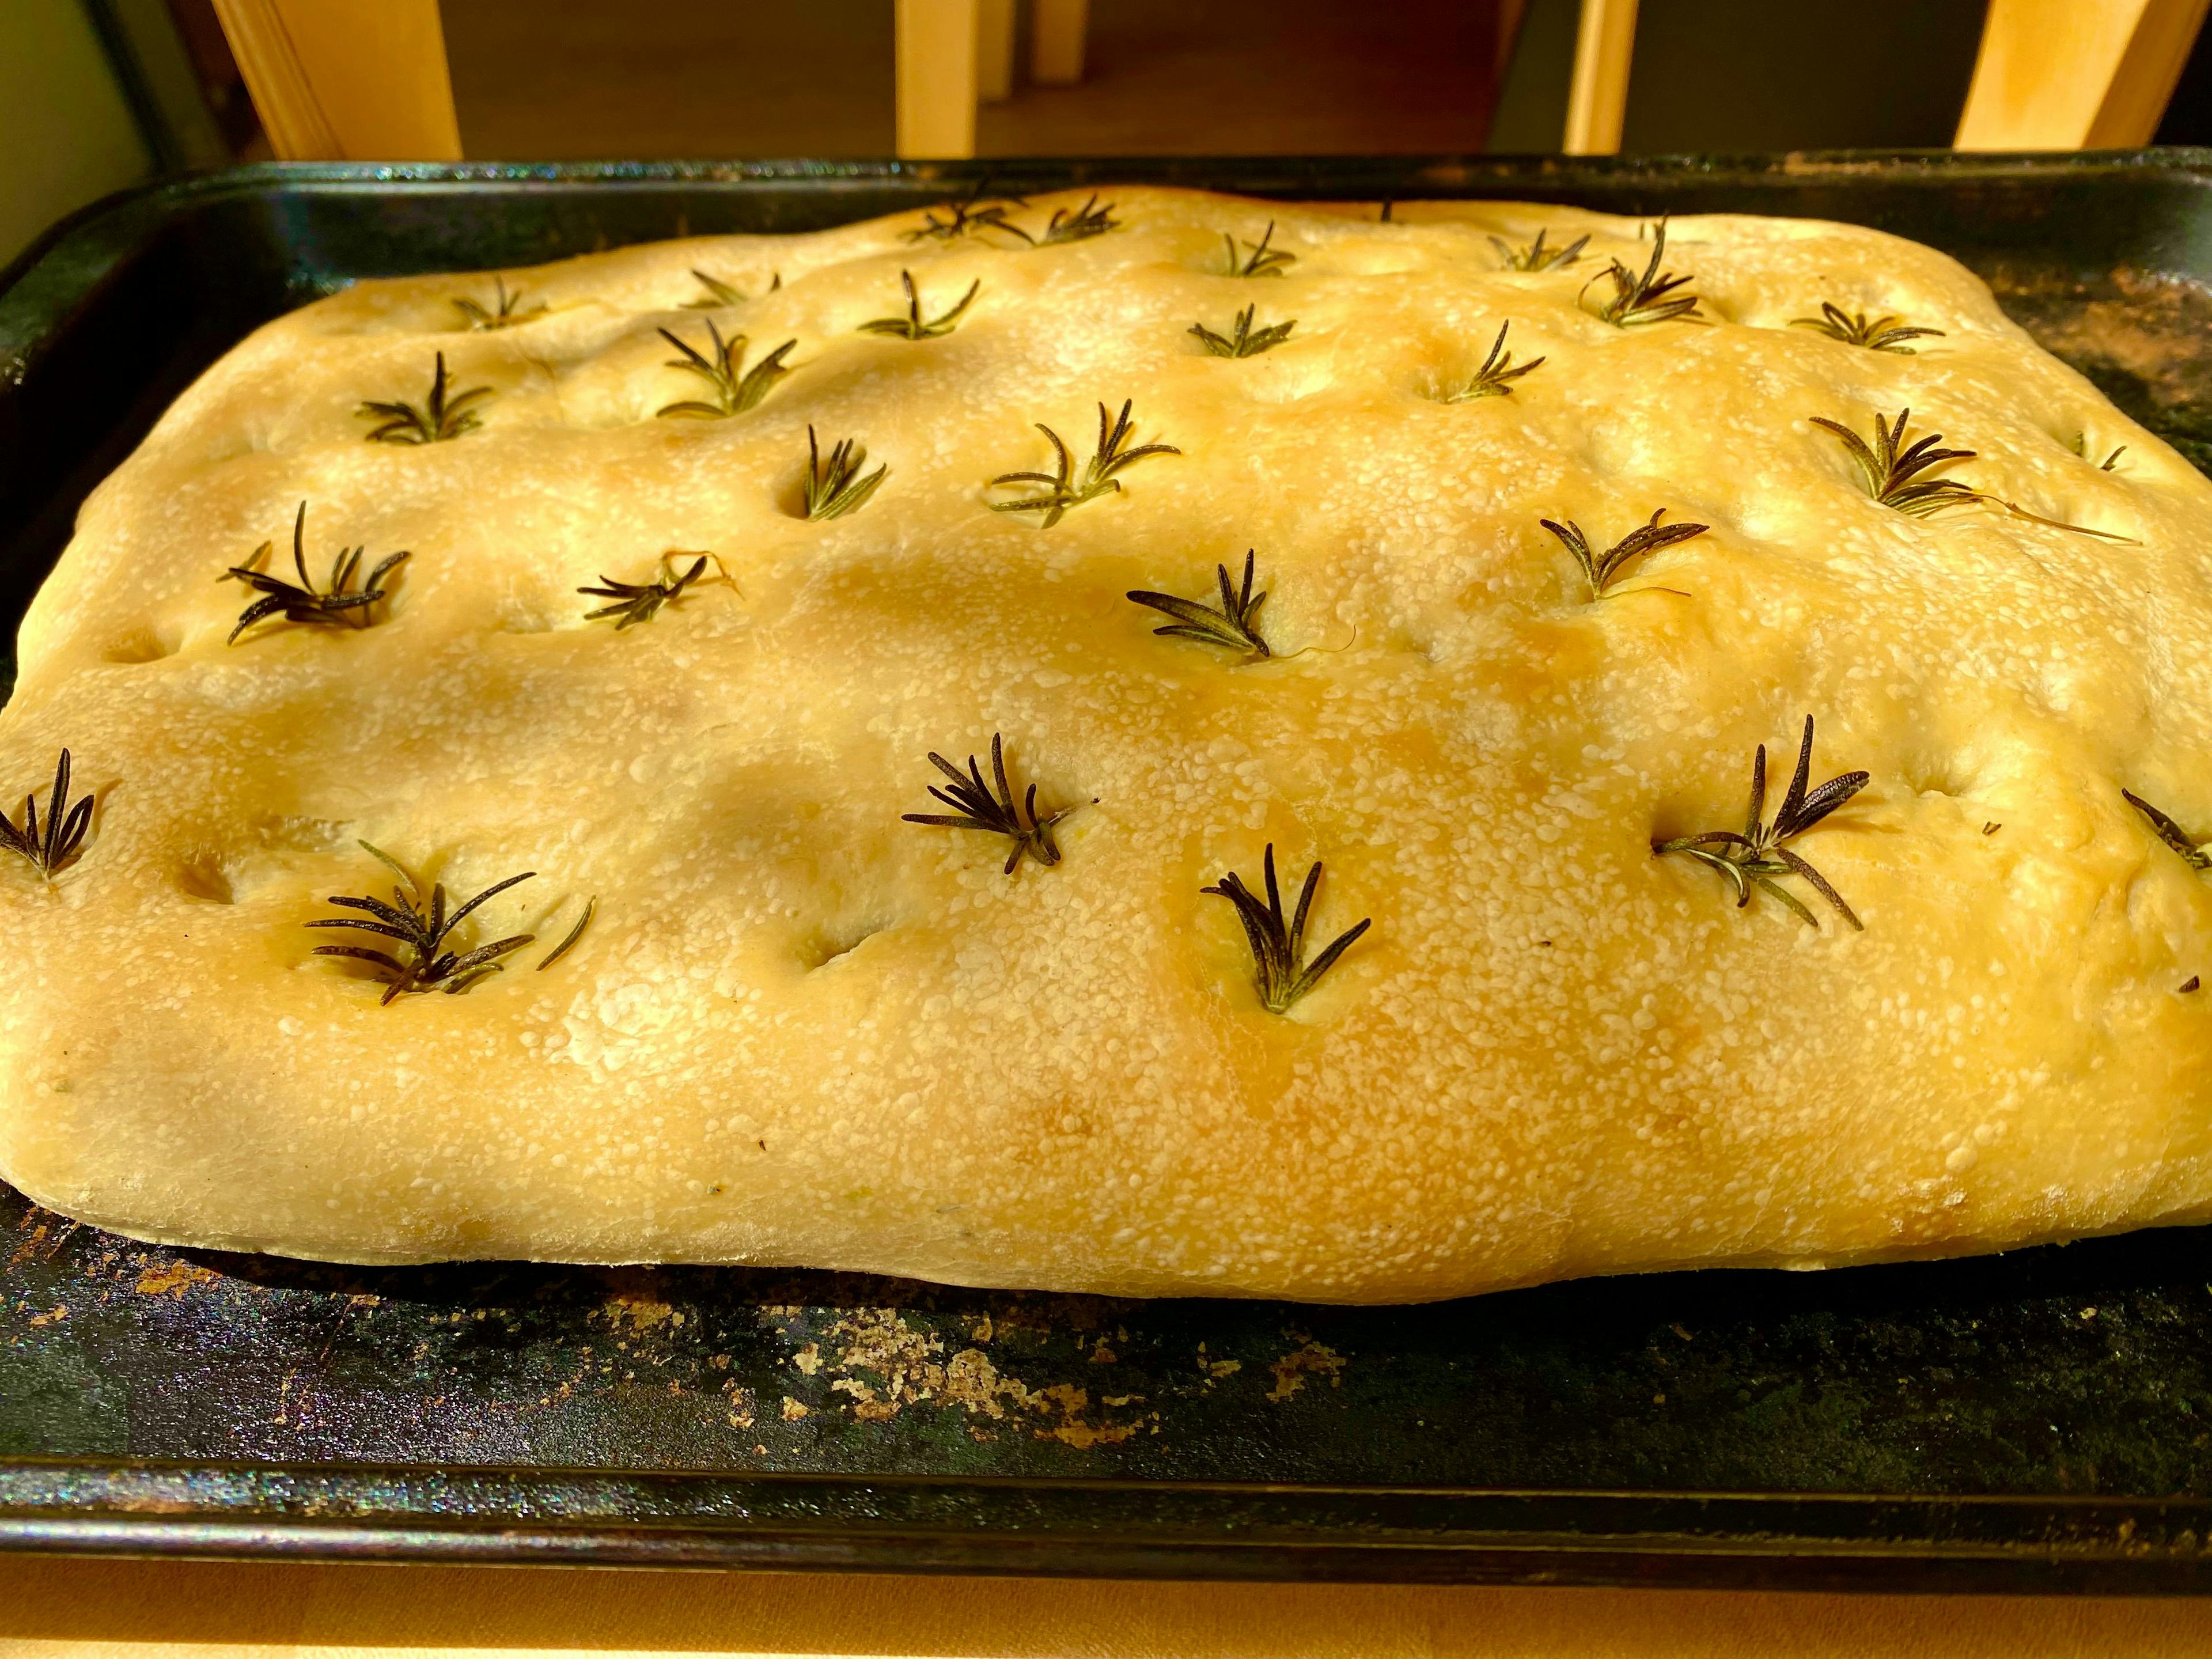  Freshly baked focaccia with rosemary